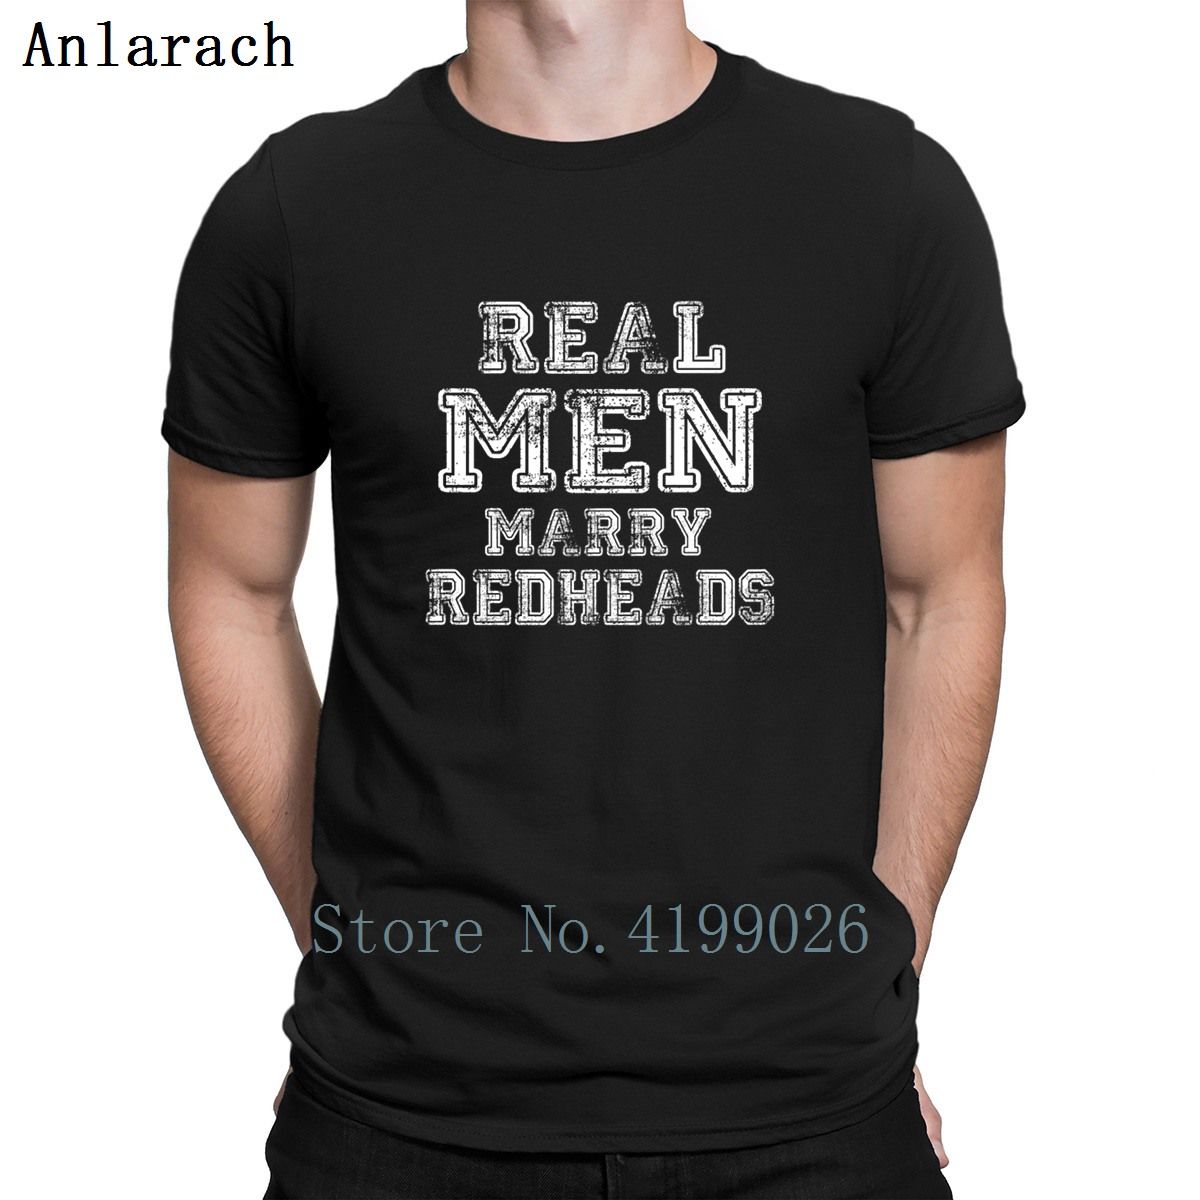 t shirts for redheads